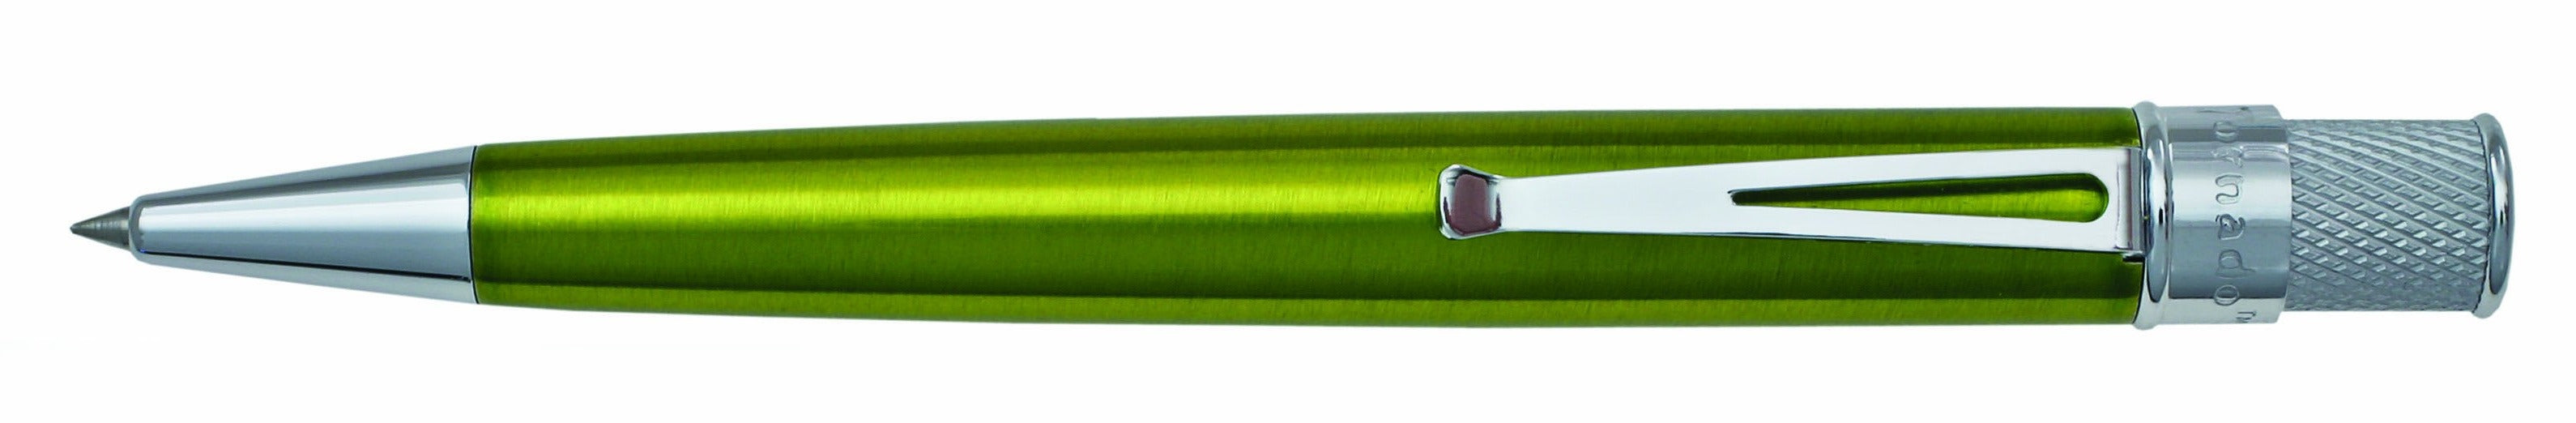 Kiwi stainless steel barrel with vibrant lacquers, knurl twist-top, packaged in pen stand